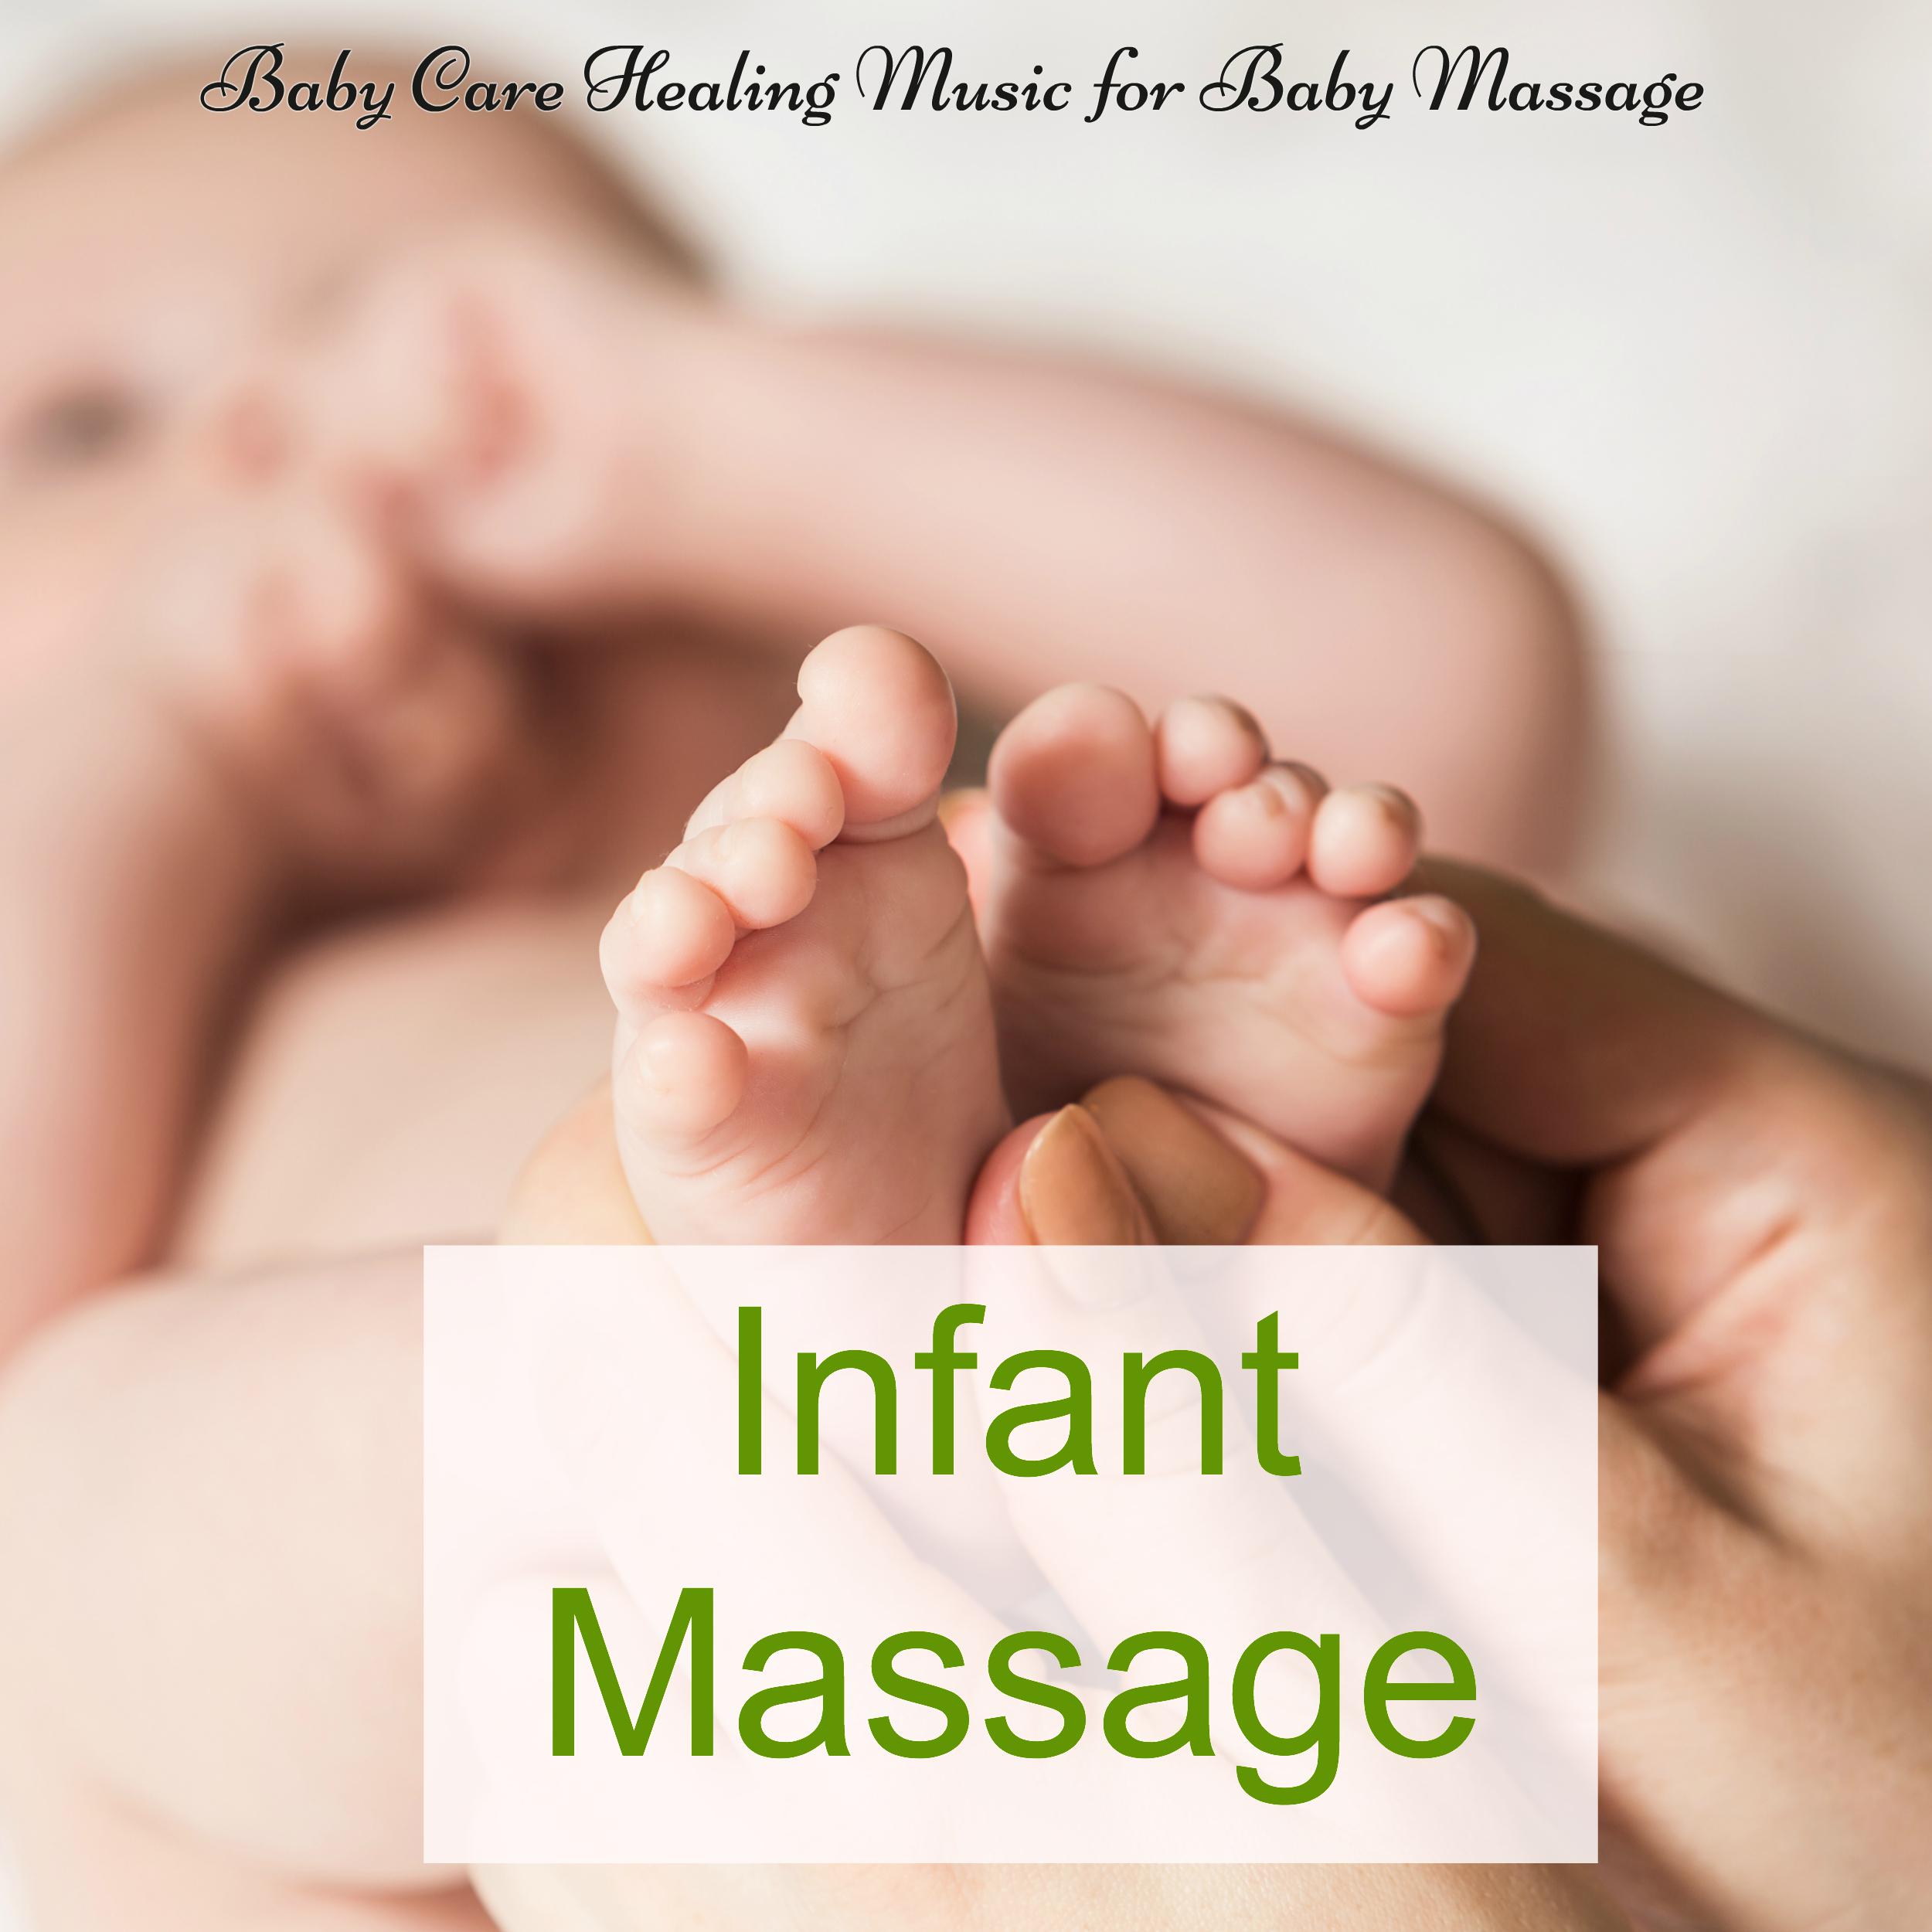 Infant Massage – Baby Care Healing Music for Baby Massage, Healing Touch and Relaxation to Help Your Baby Sleep